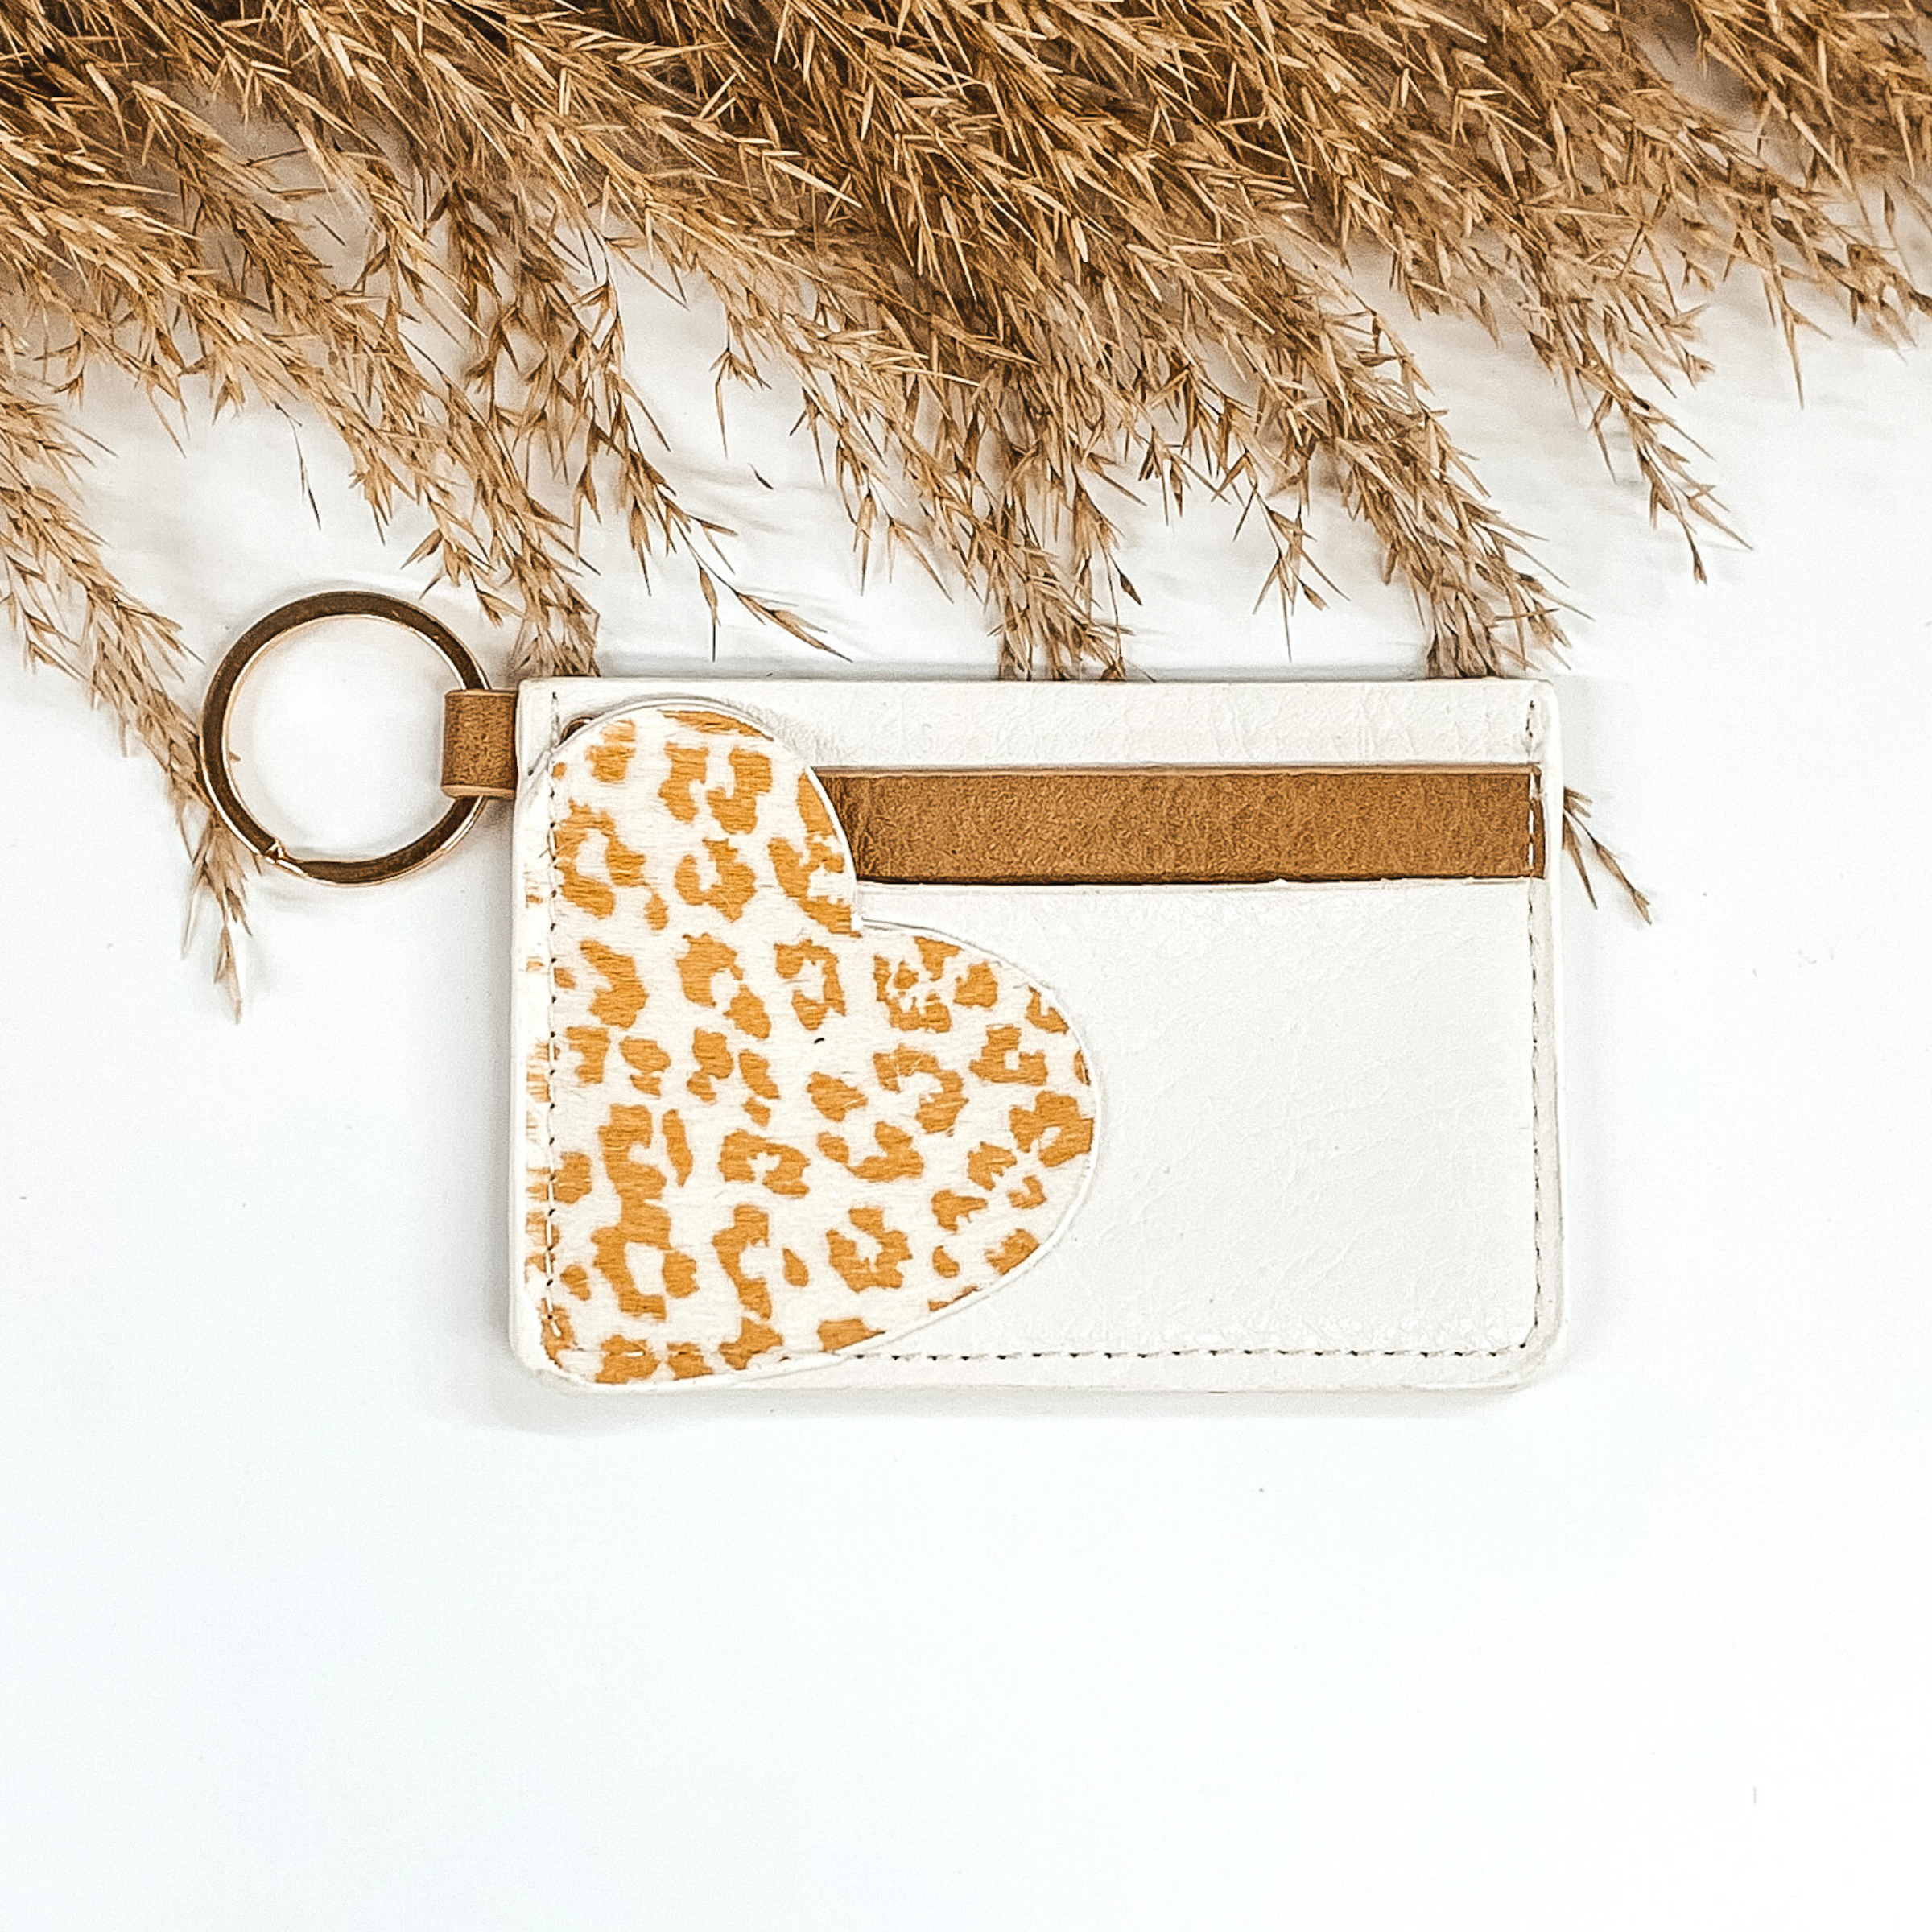 This is a rectangle id key holder that has a gold key ring. On the front you have ivory and tan layer and then a white heart with a tan leopard print is also on the front. It is pictured on a a white background that has brown floral at the top of the picture.